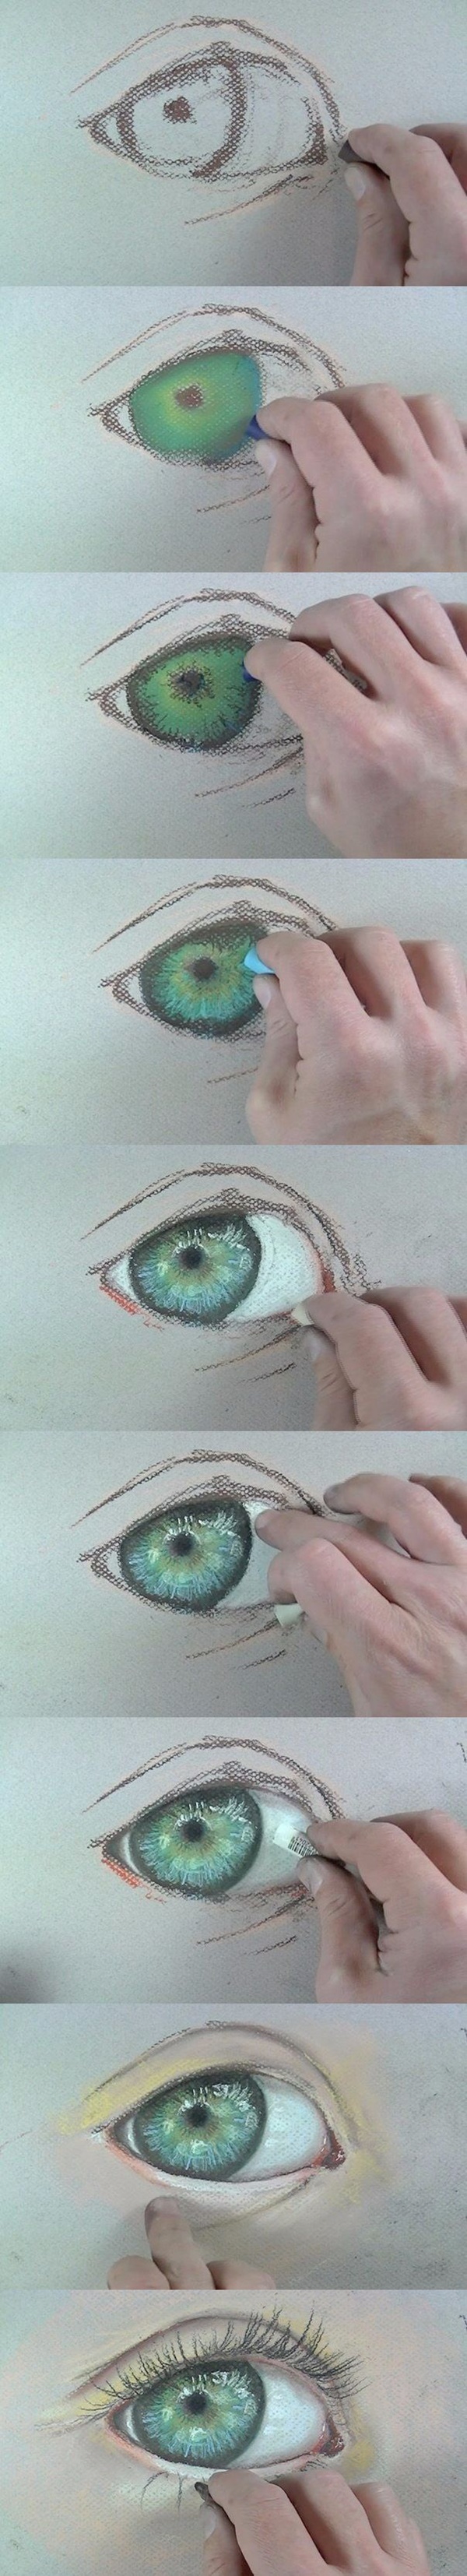 How To Draw An Eye With Crayon: Step By Step